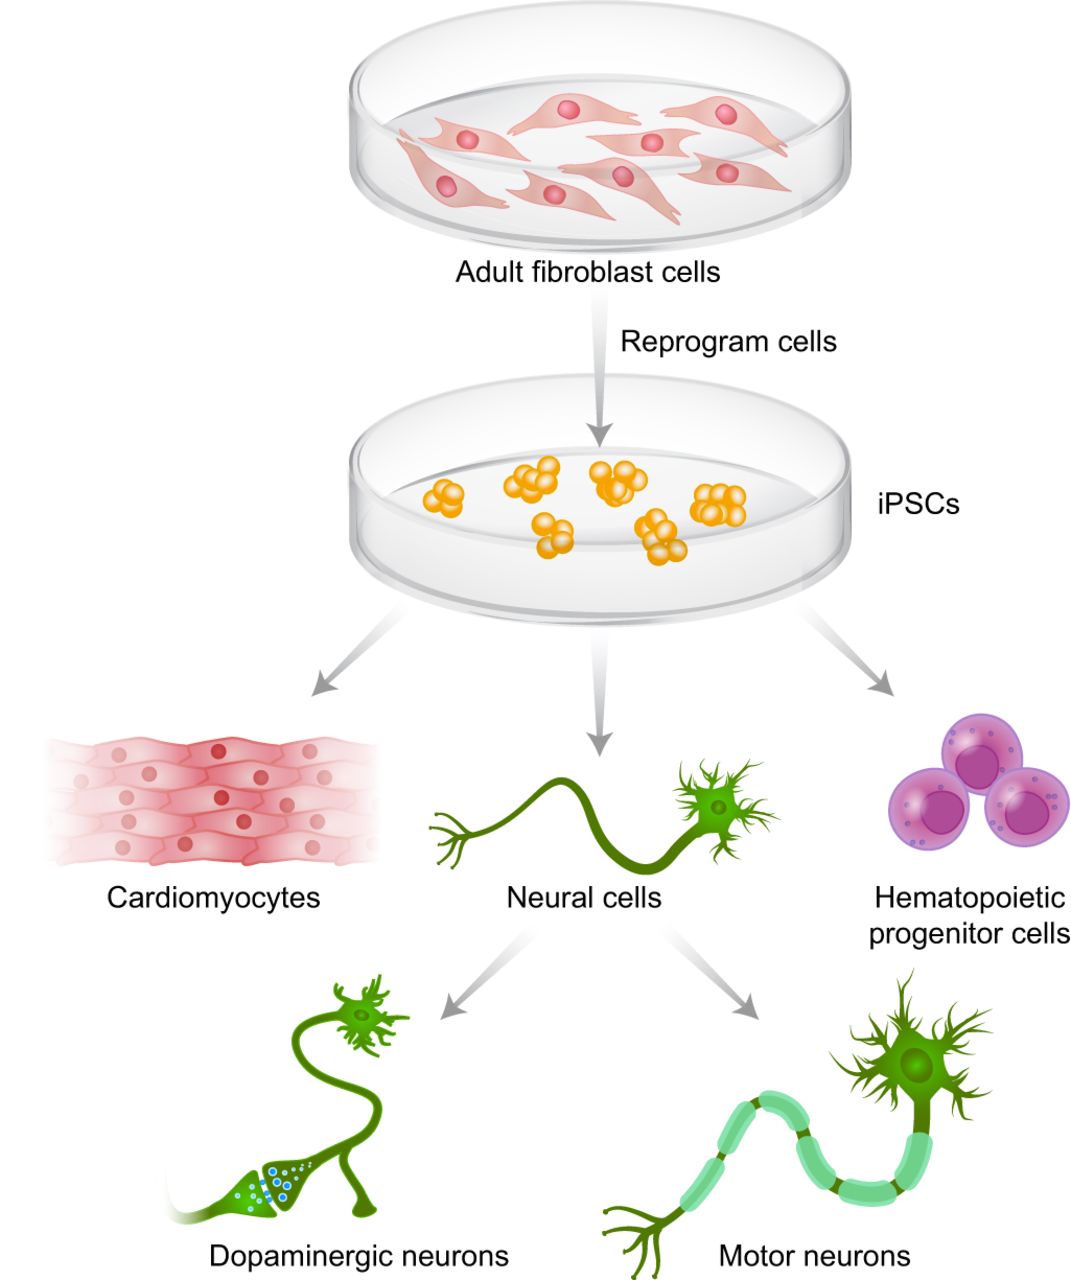 Induced pluripotent stem cells (iPSCs) can differentiate into different cell types.